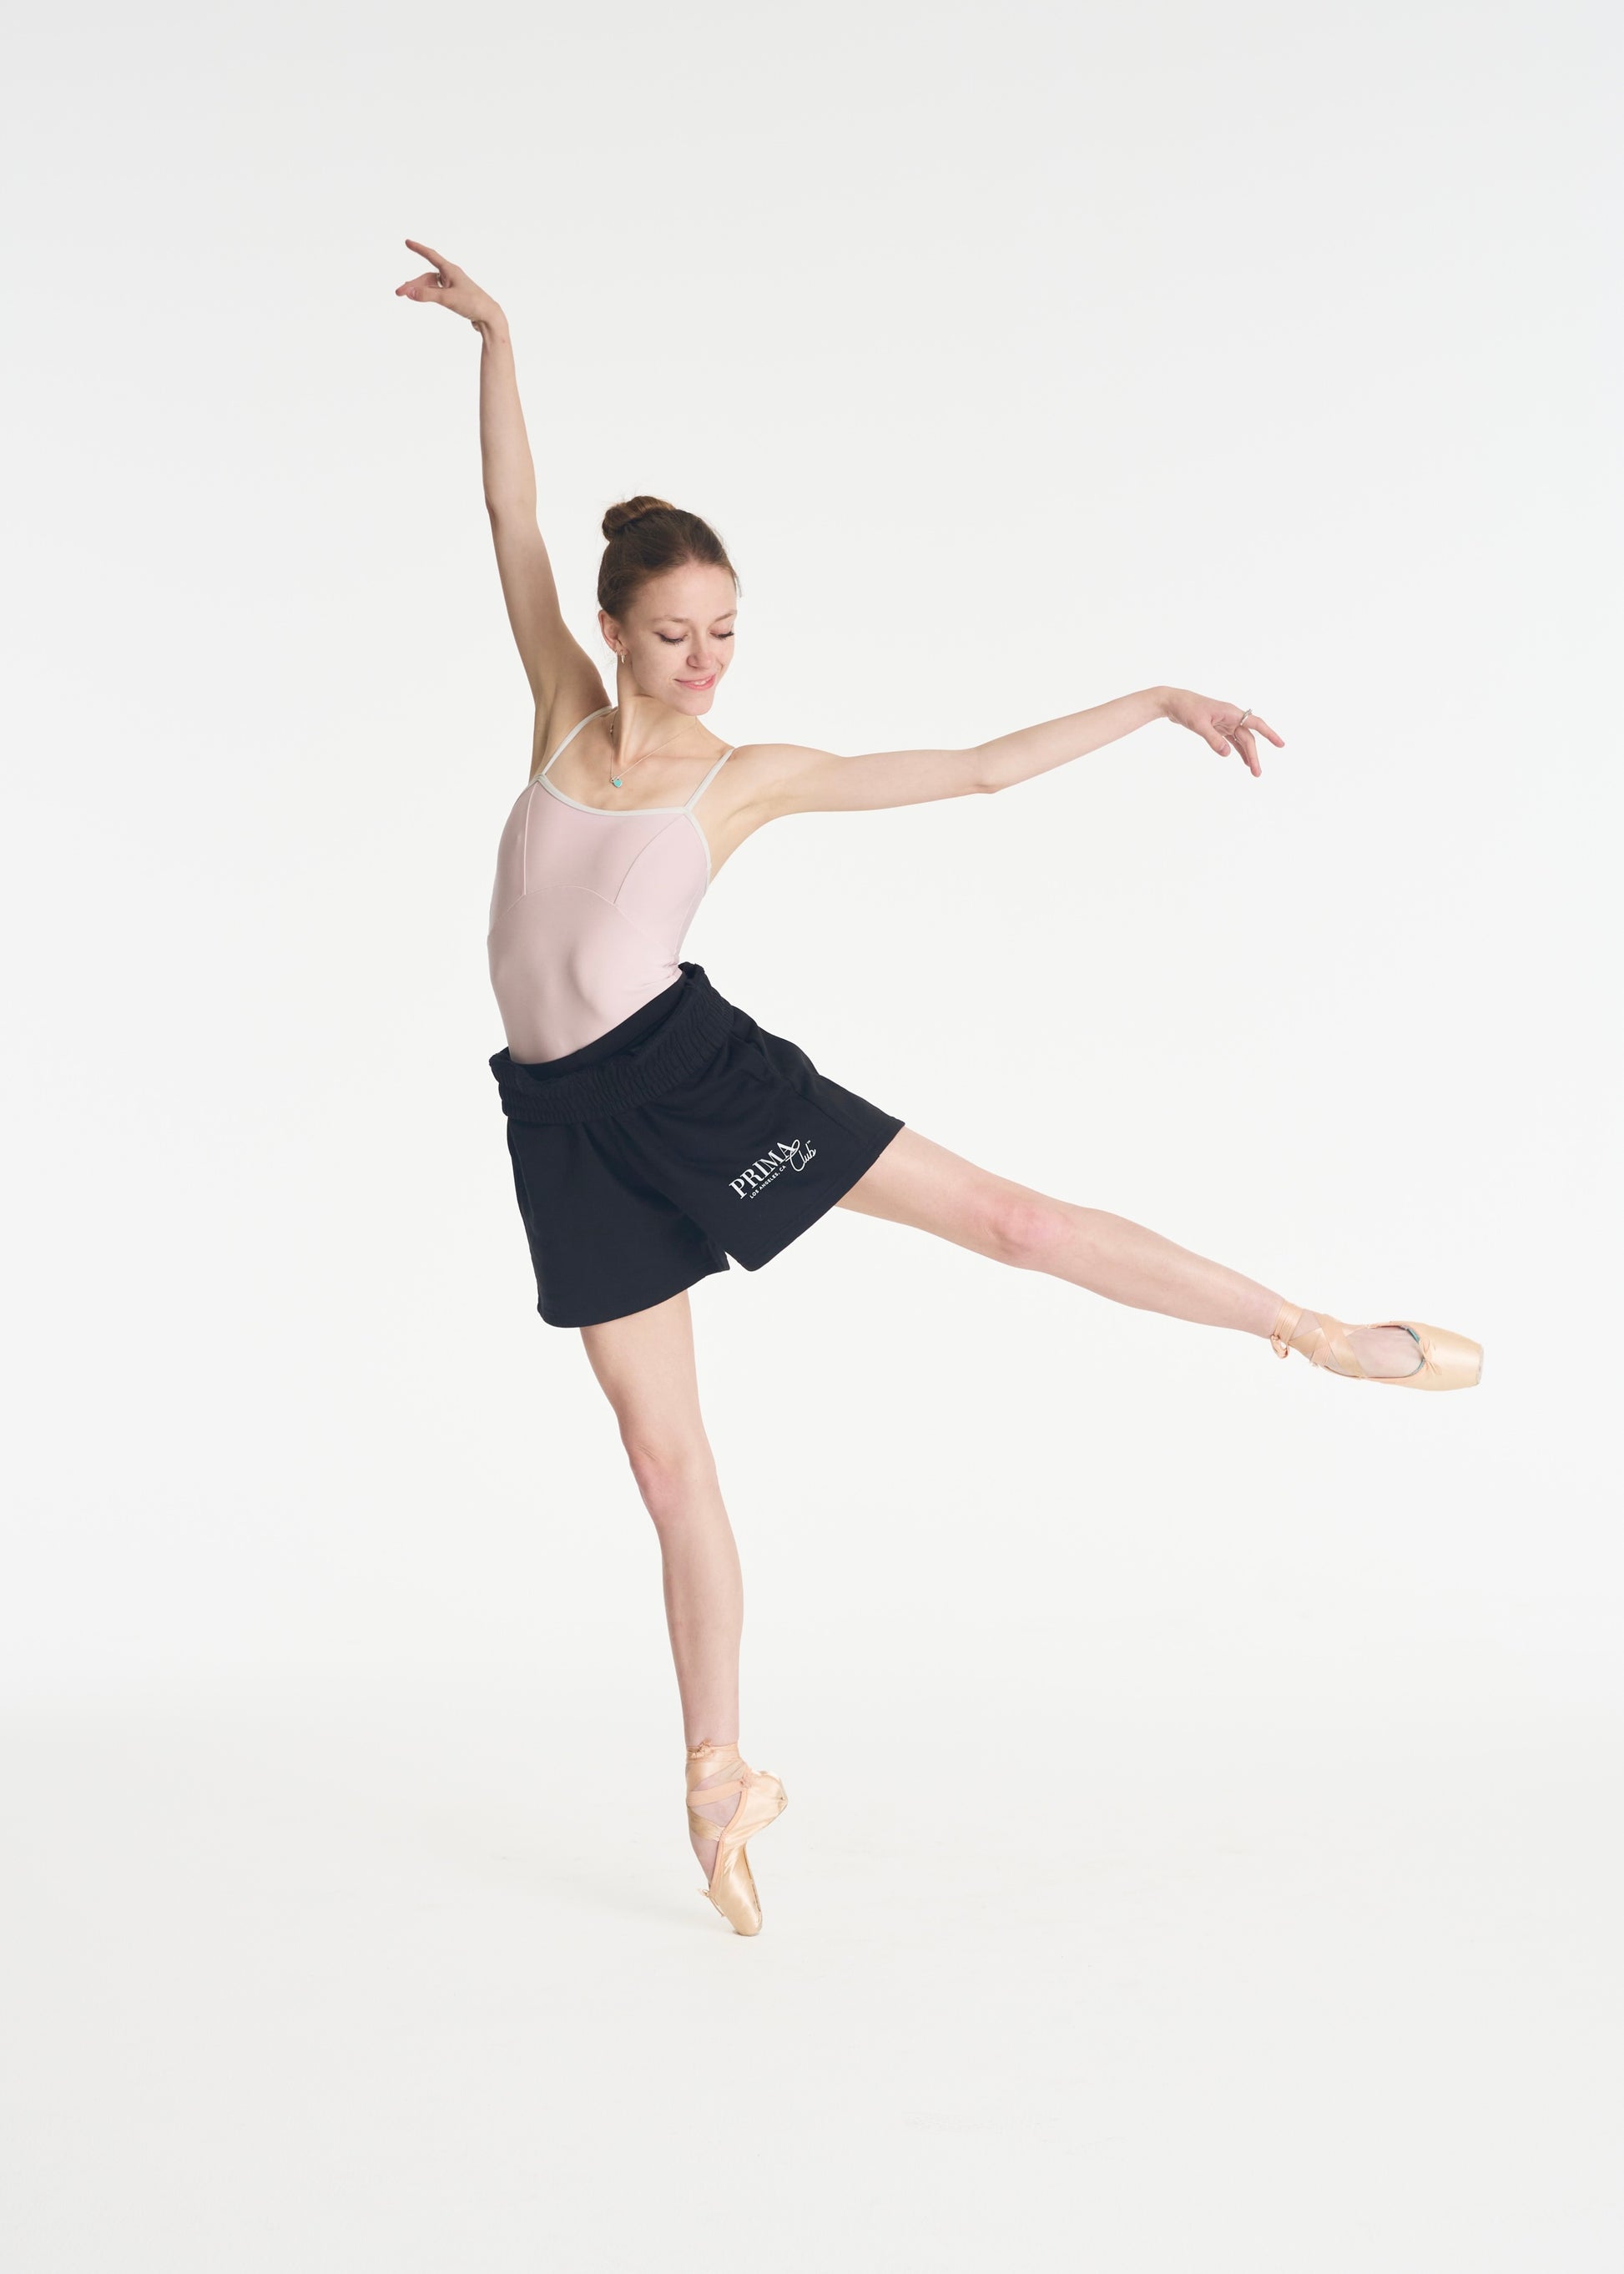 model dancing on pointe wearing The Prima Club shorts